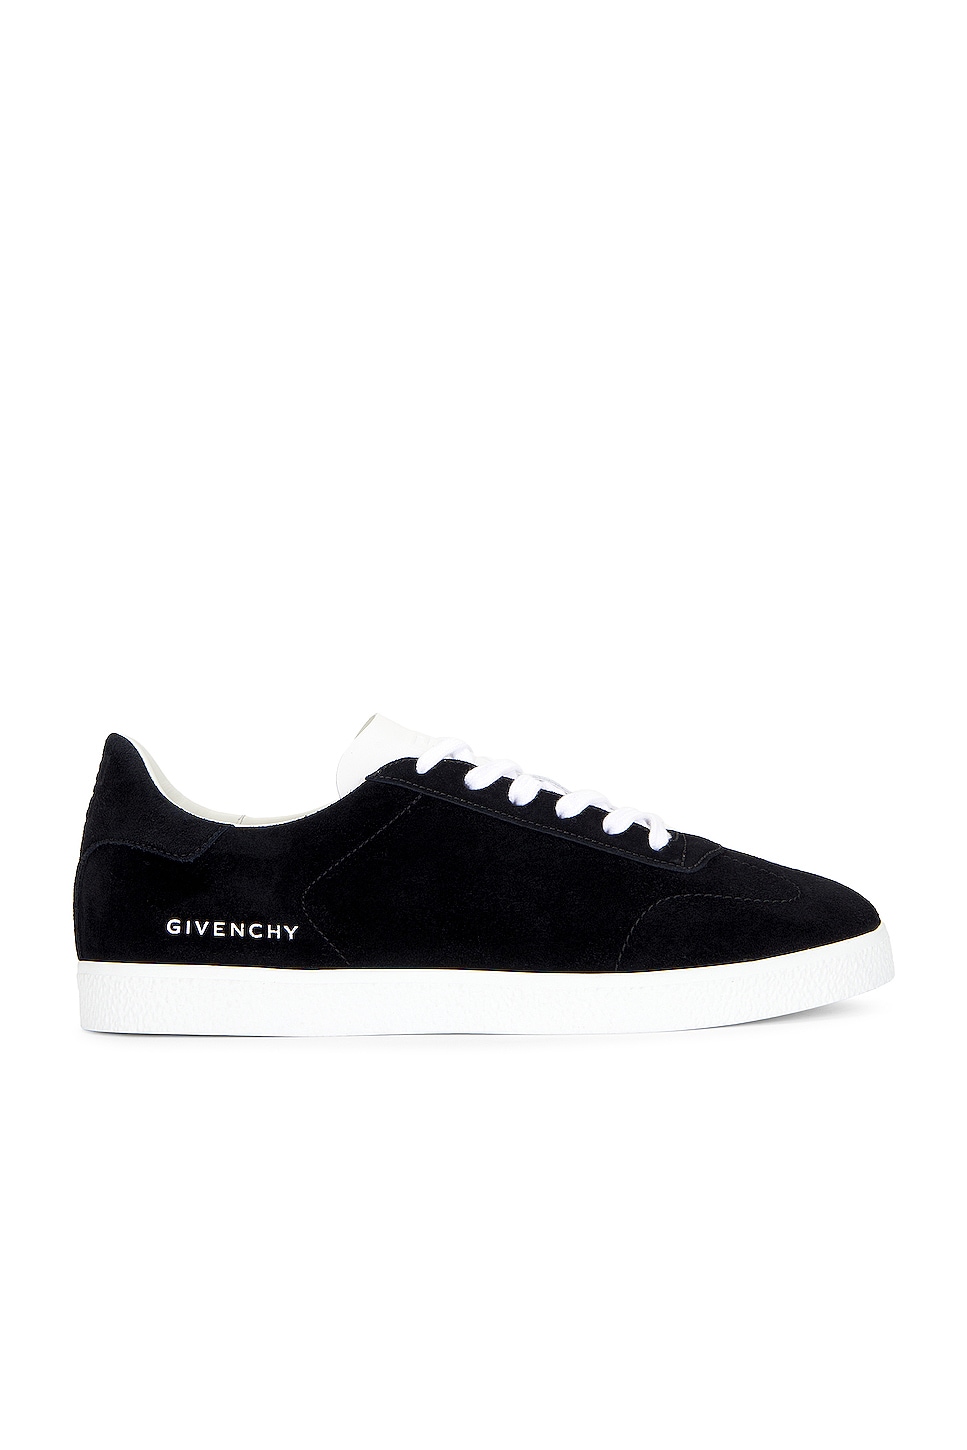 Image 1 of Givenchy Town Low Top Sneaker in Black